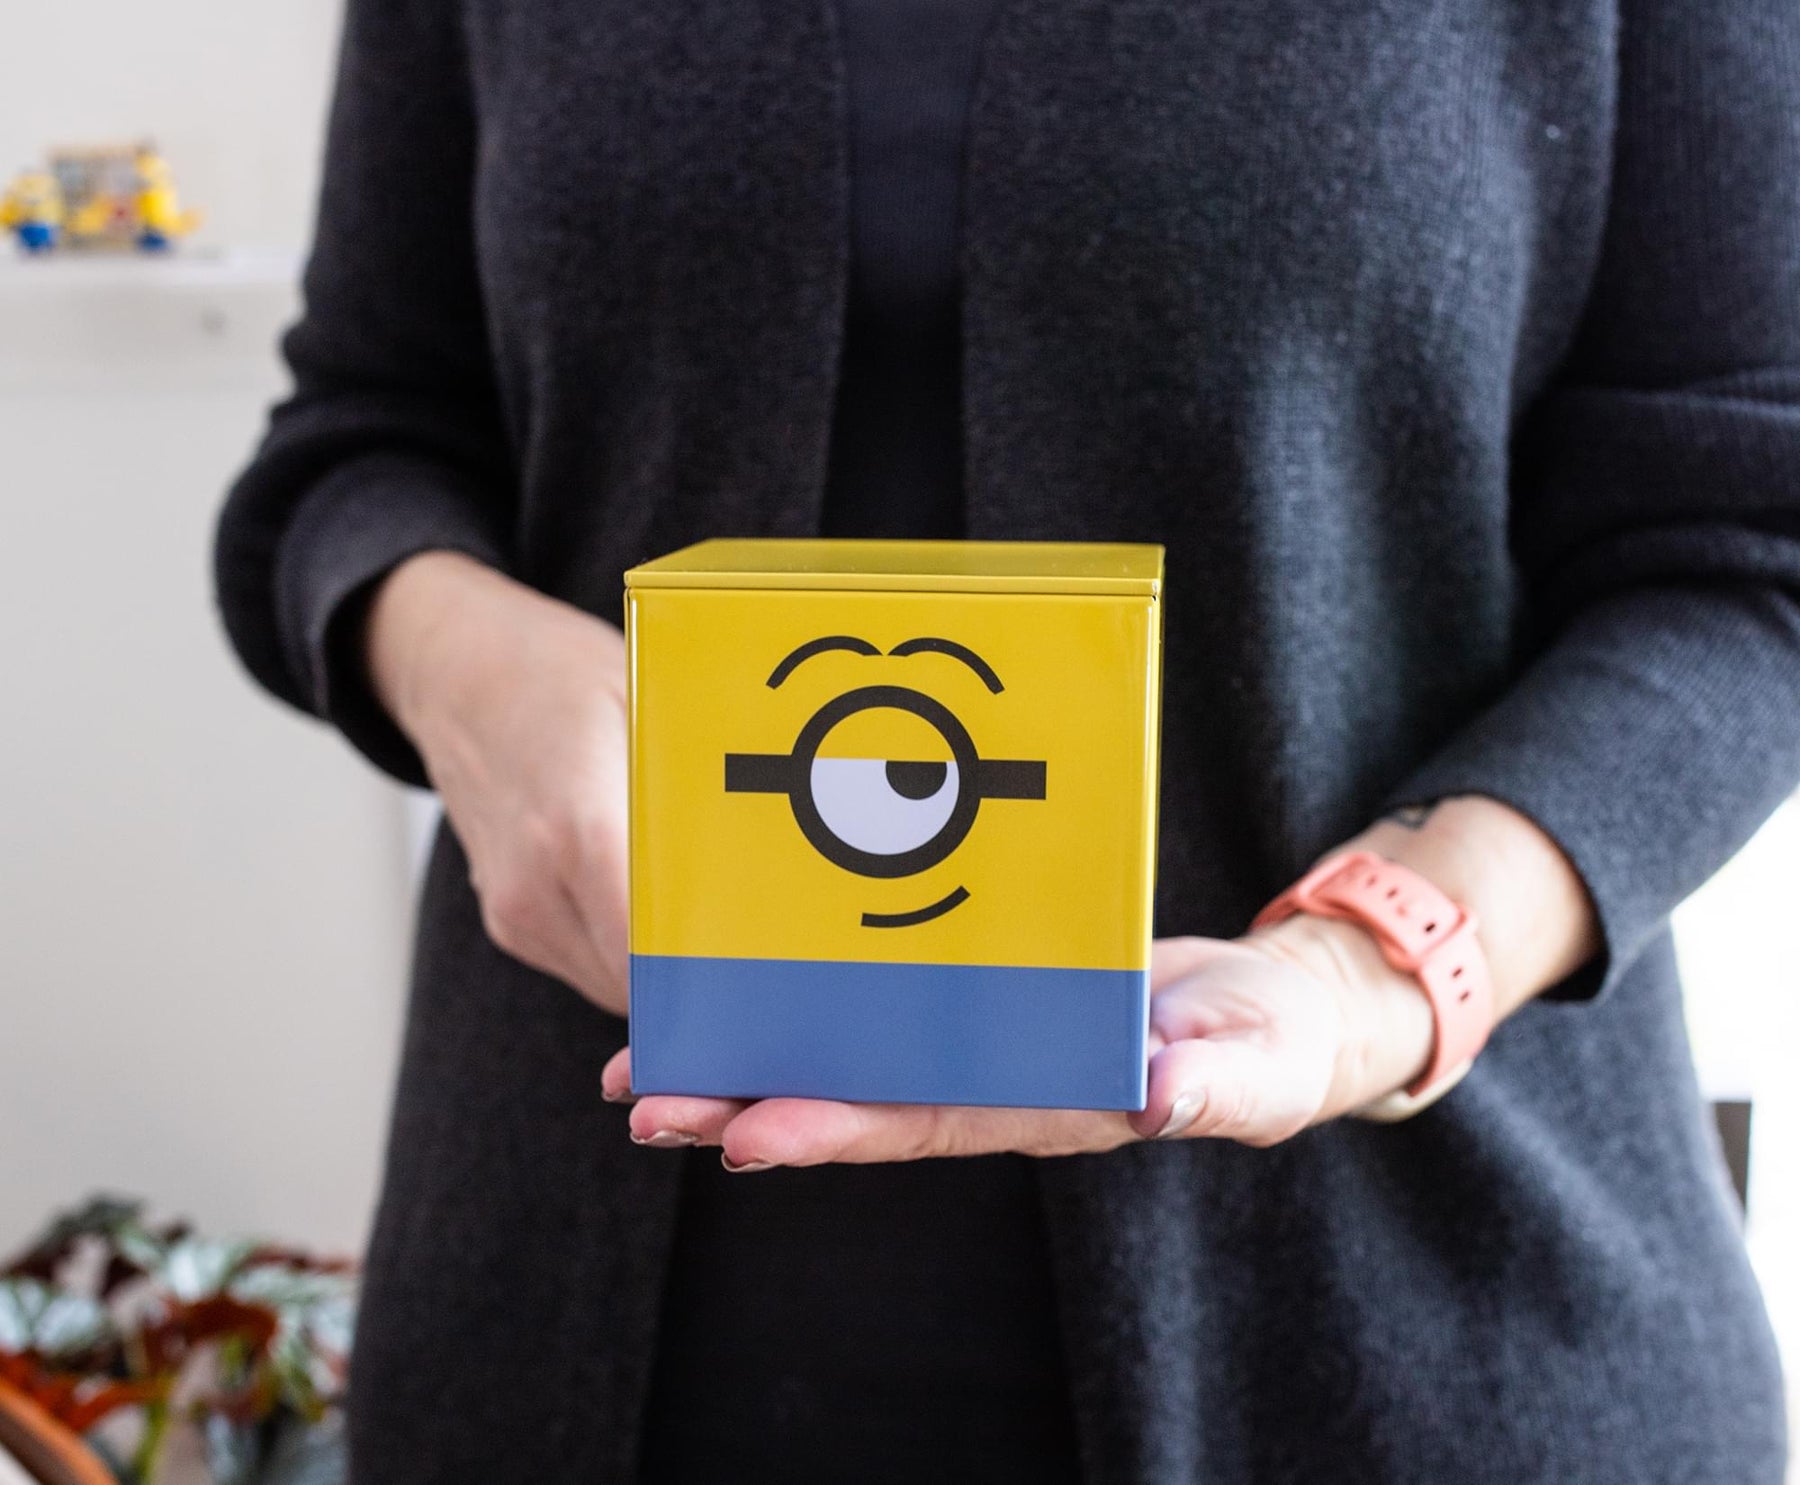 Despicable Me Storage & Containers for Kids